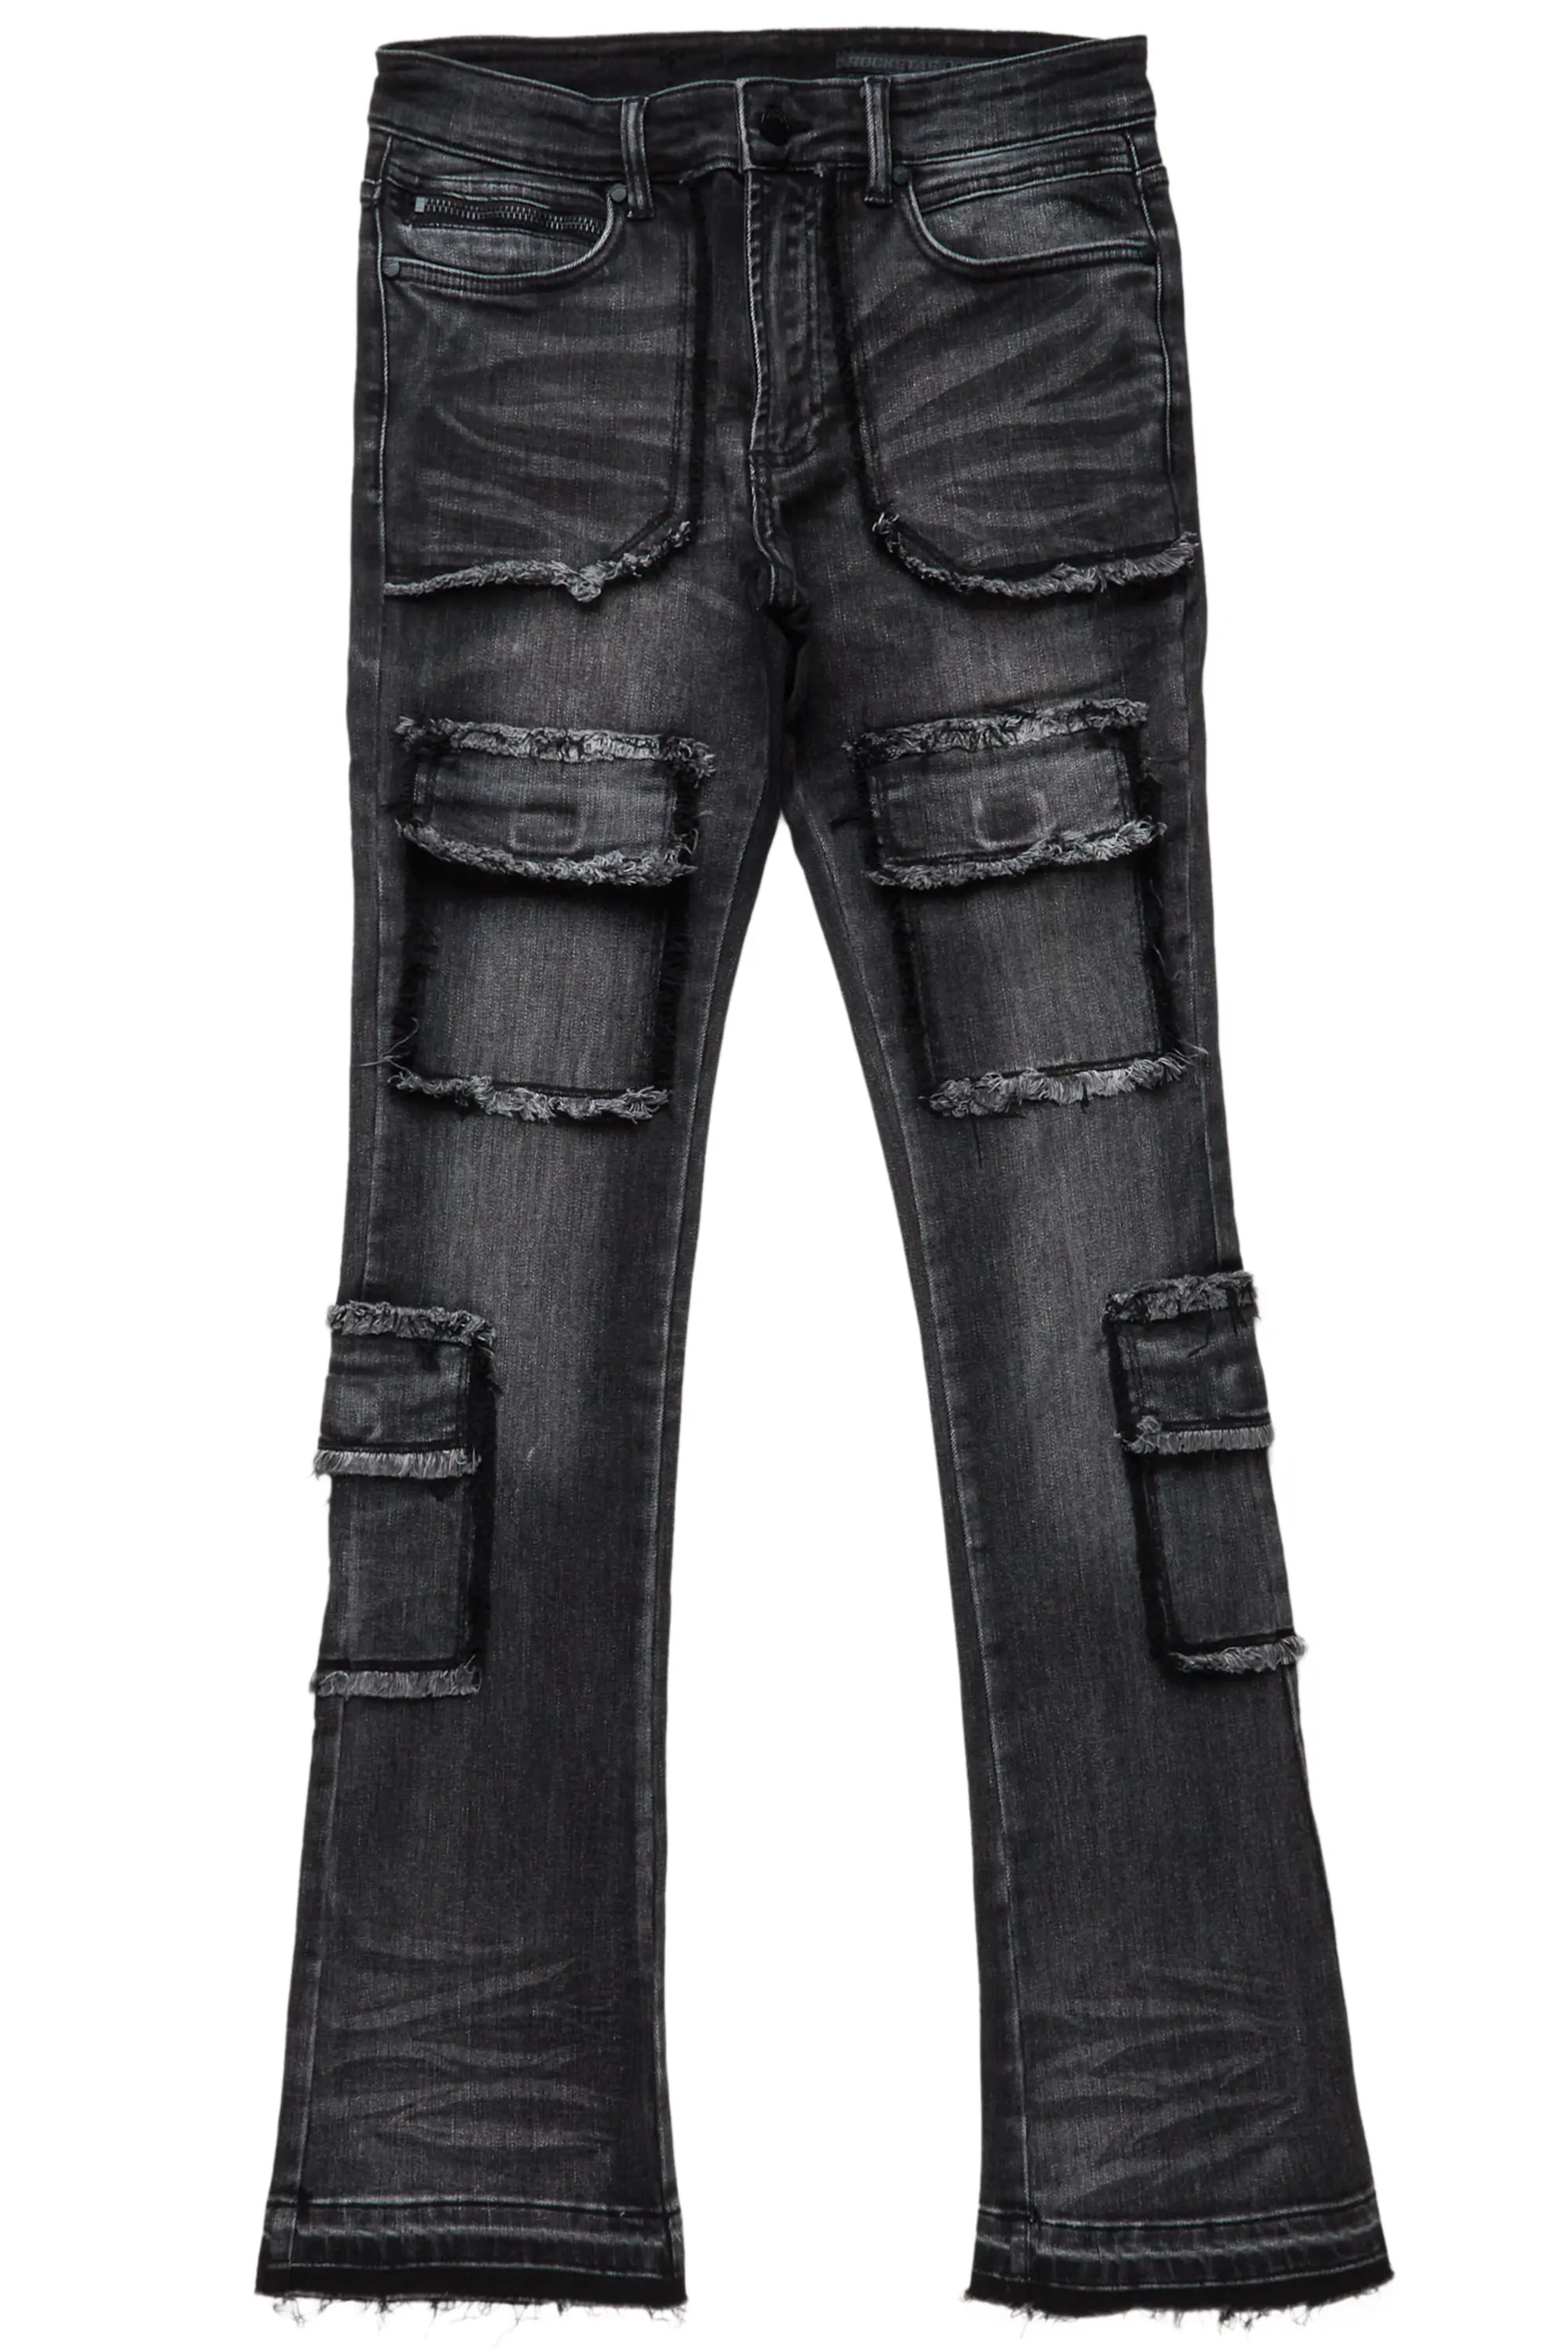 Alternate View 2 of Tyrell Grey Stacked Flare Cargo Jean